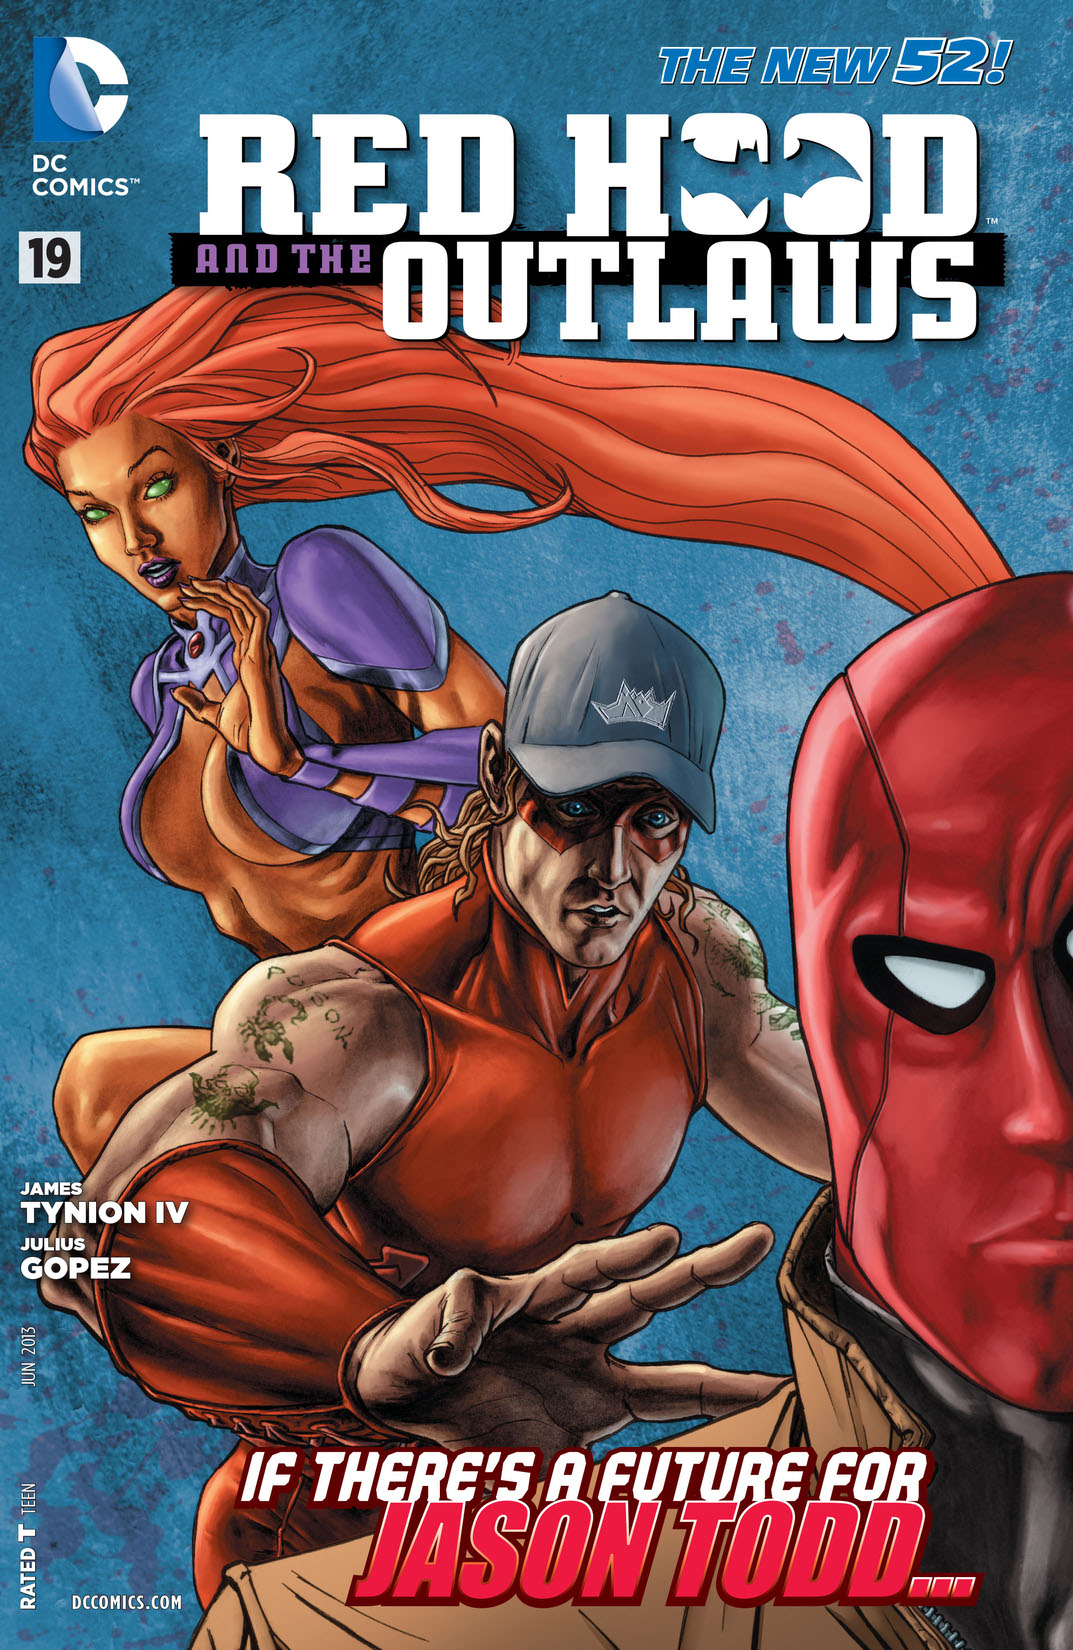 Red Hood and the Outlaws (2011-) #19 preview images